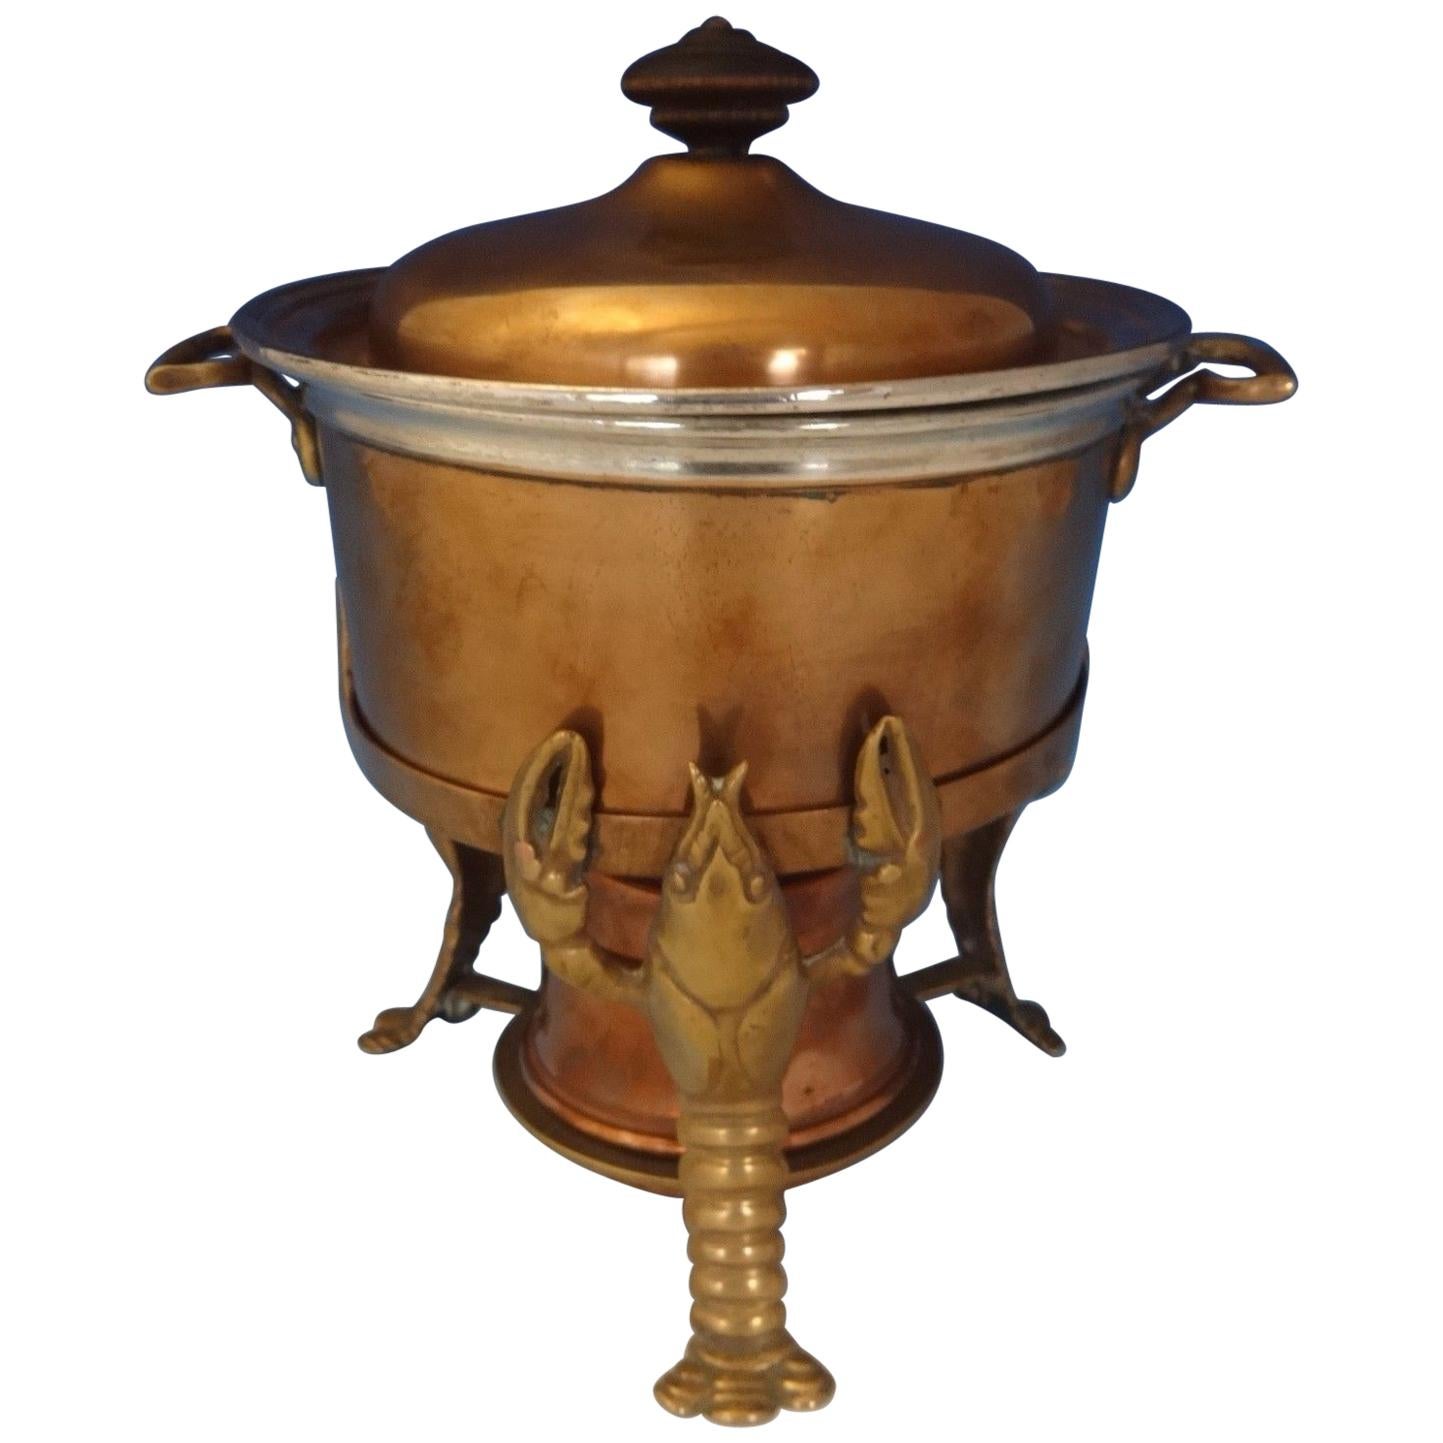 Joseph Heinrichs Lobster Pot Copper and Bronze with 3-D Lobsters